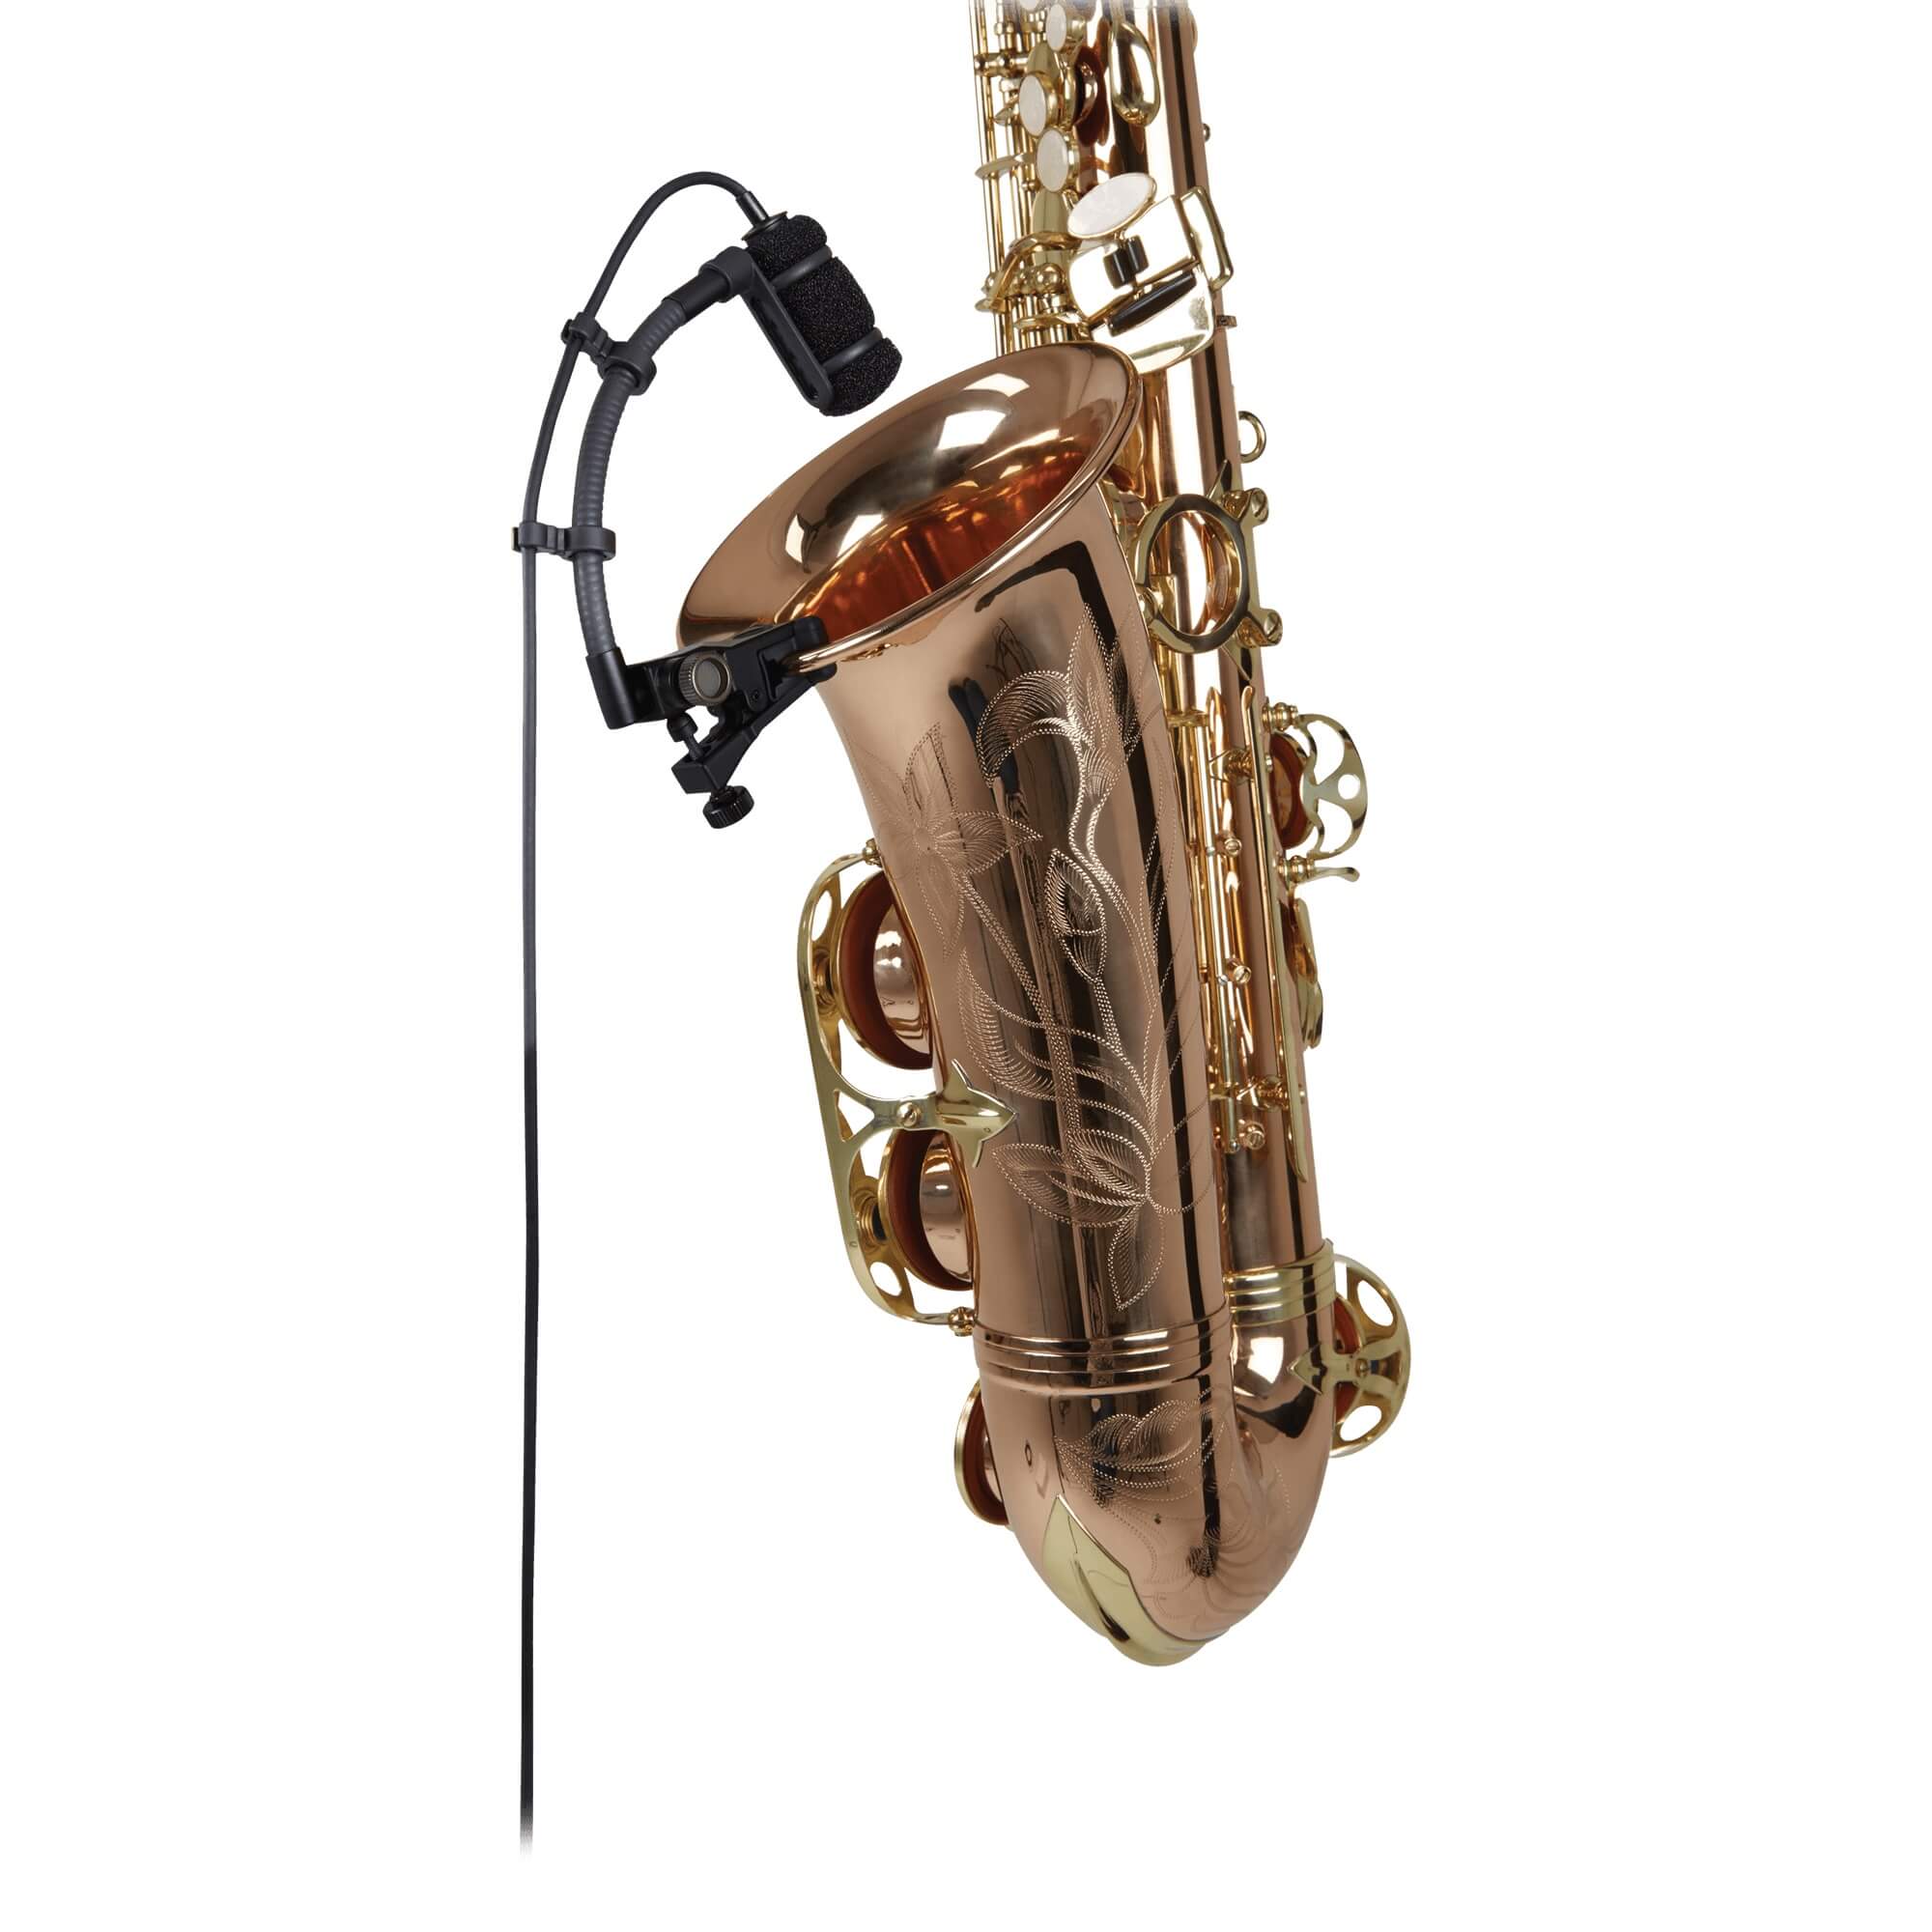 Audio-Technica ATM350U - Cardioid Condenser Instrument Microphone, mounted on a saxophone